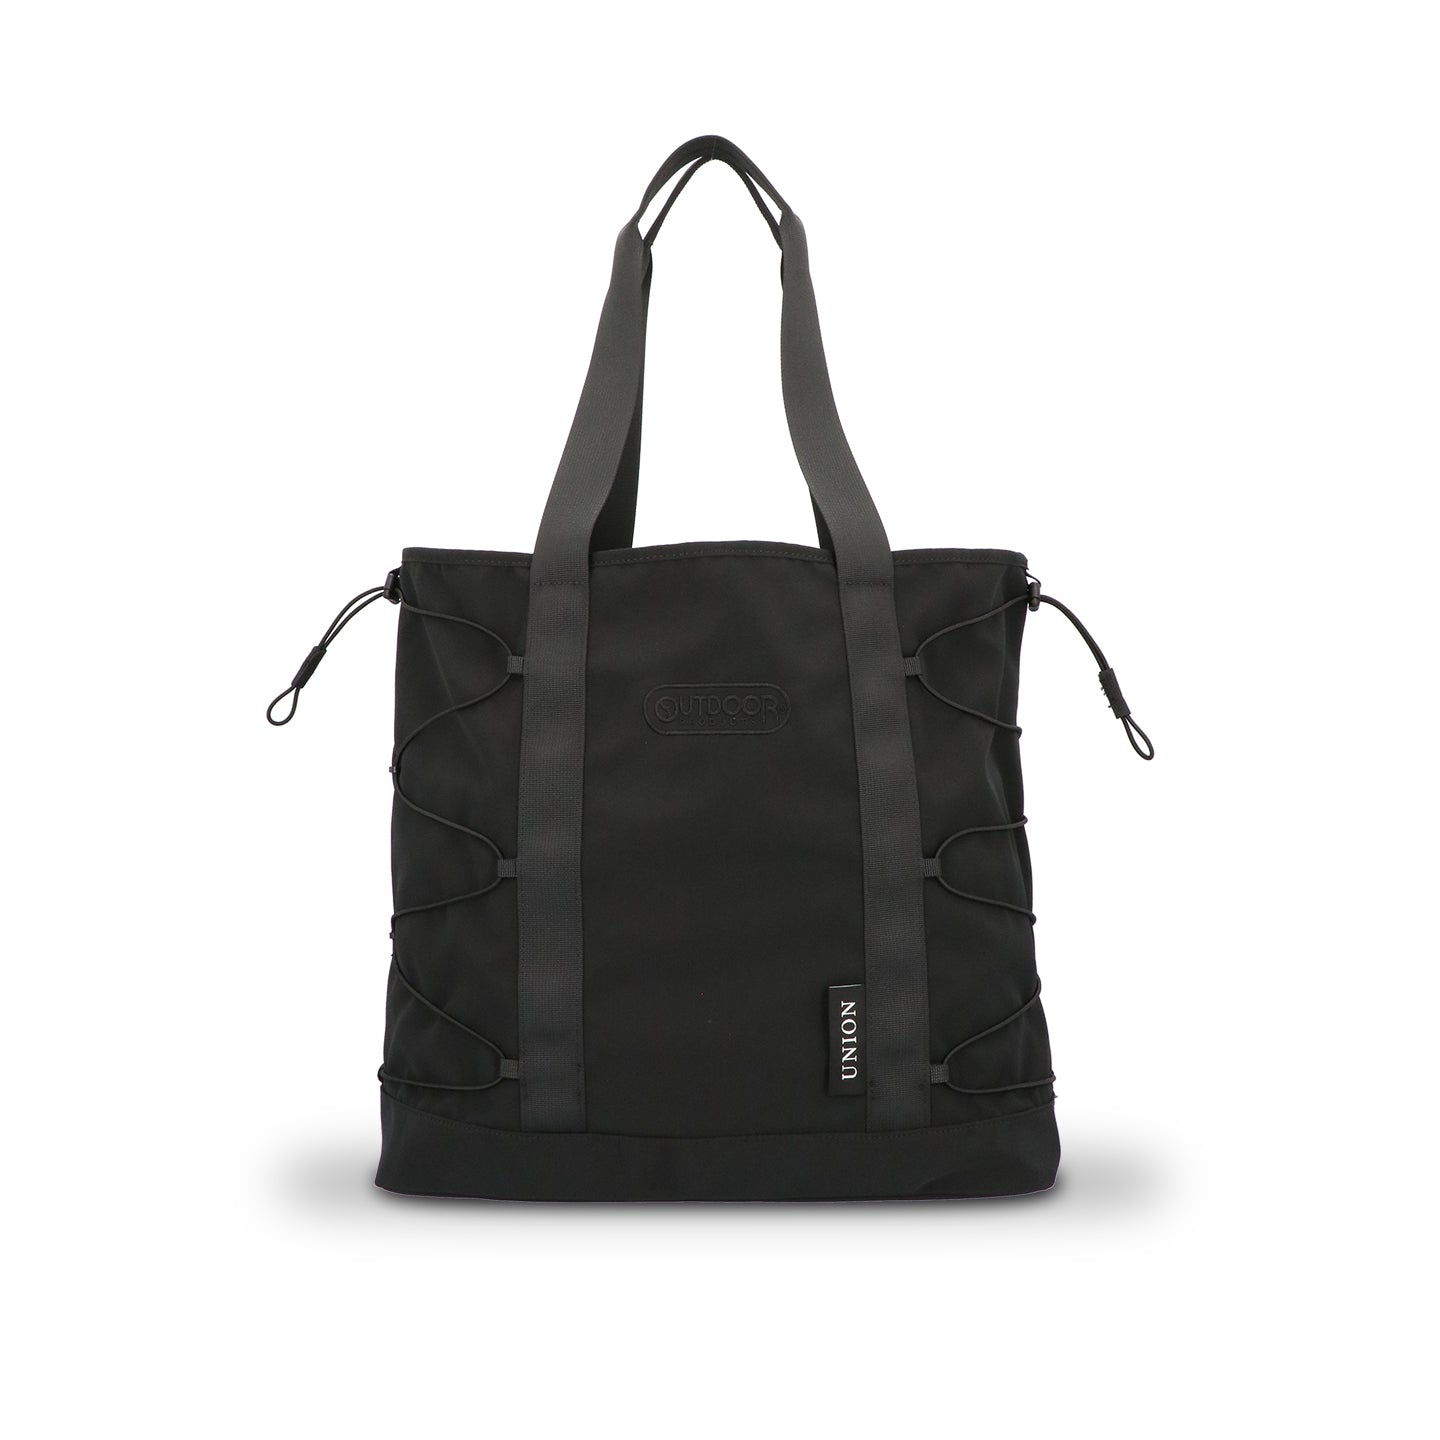 UNION OUTDOOR PRODUCTS TOTE BAG